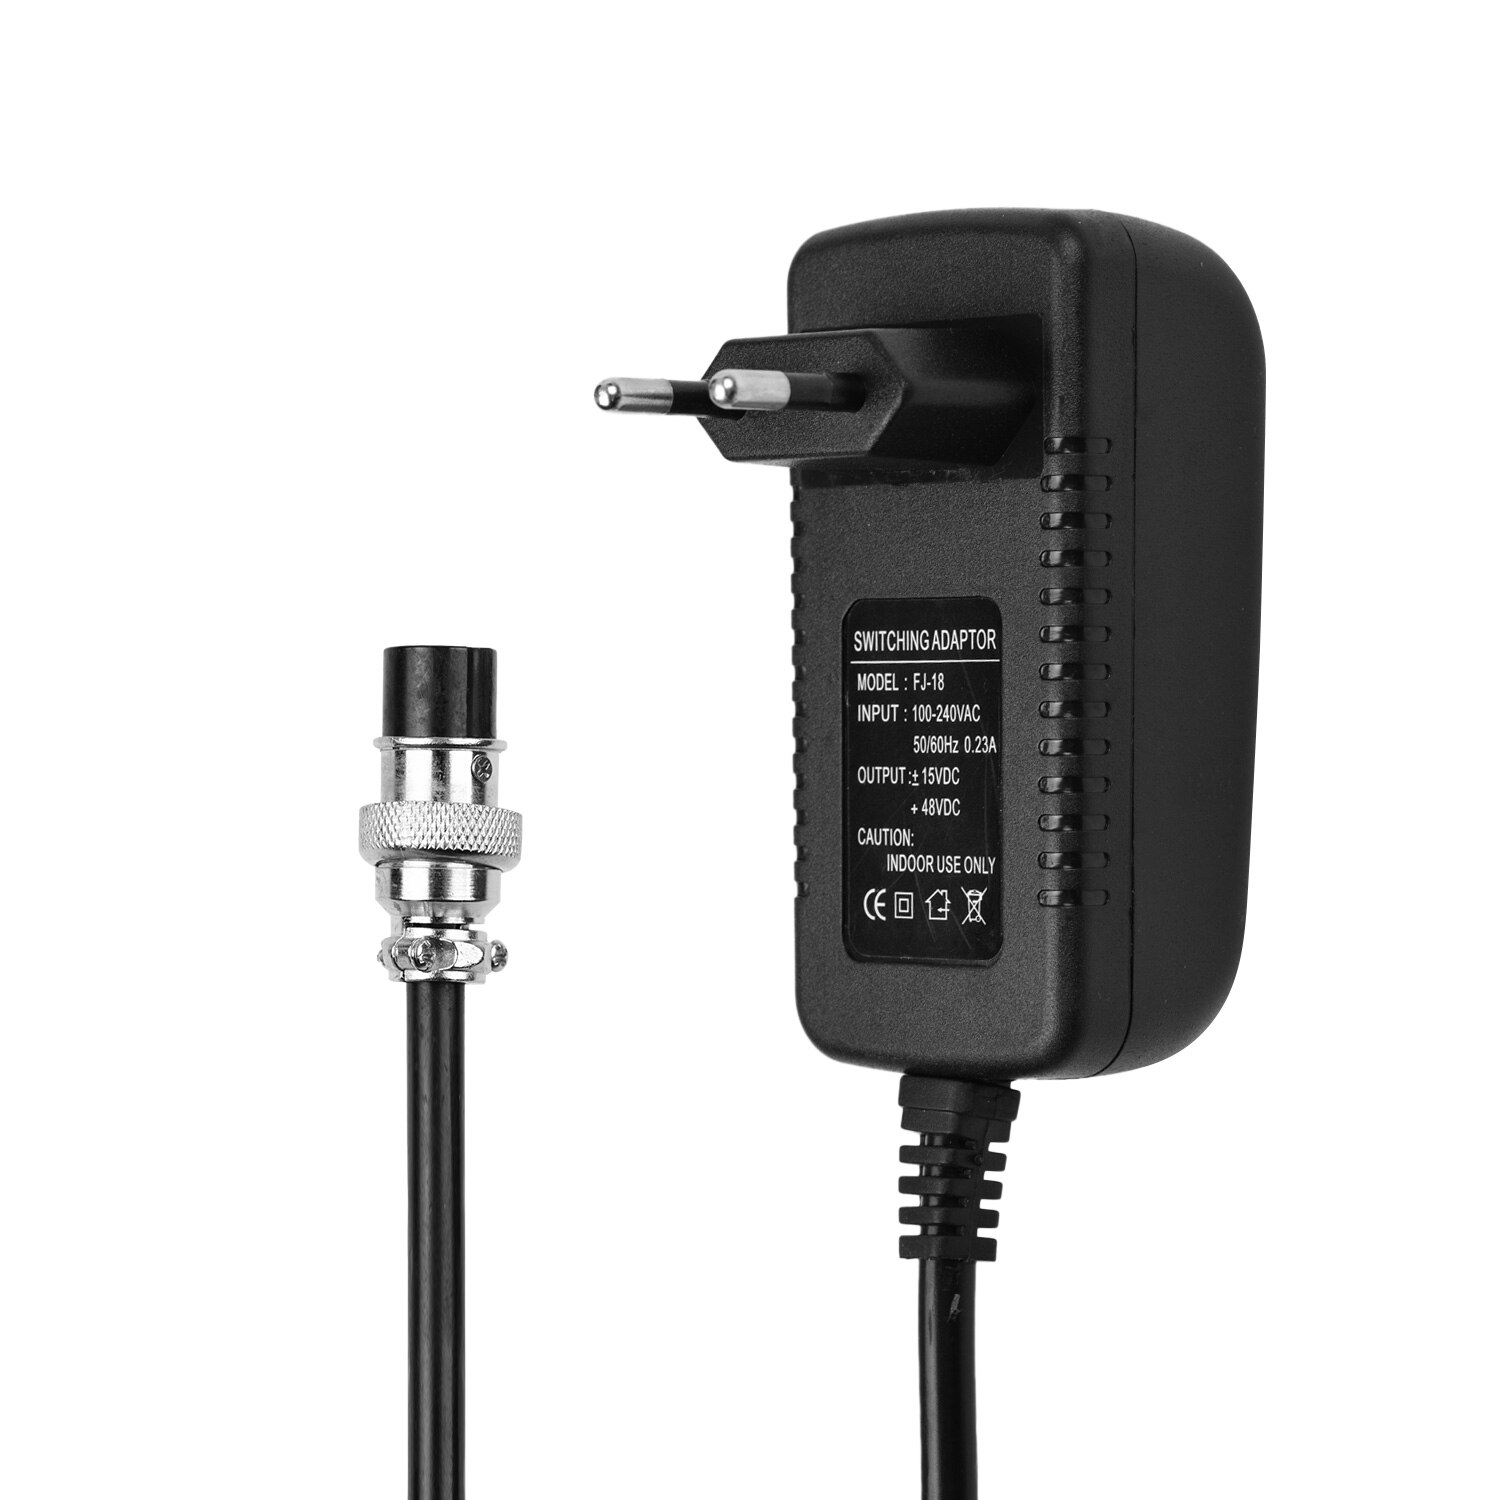 Mixing Console Mixer Power Supply AC Adapter 15V 230mA Universal 4-Pin Round Connector: EU PLUG